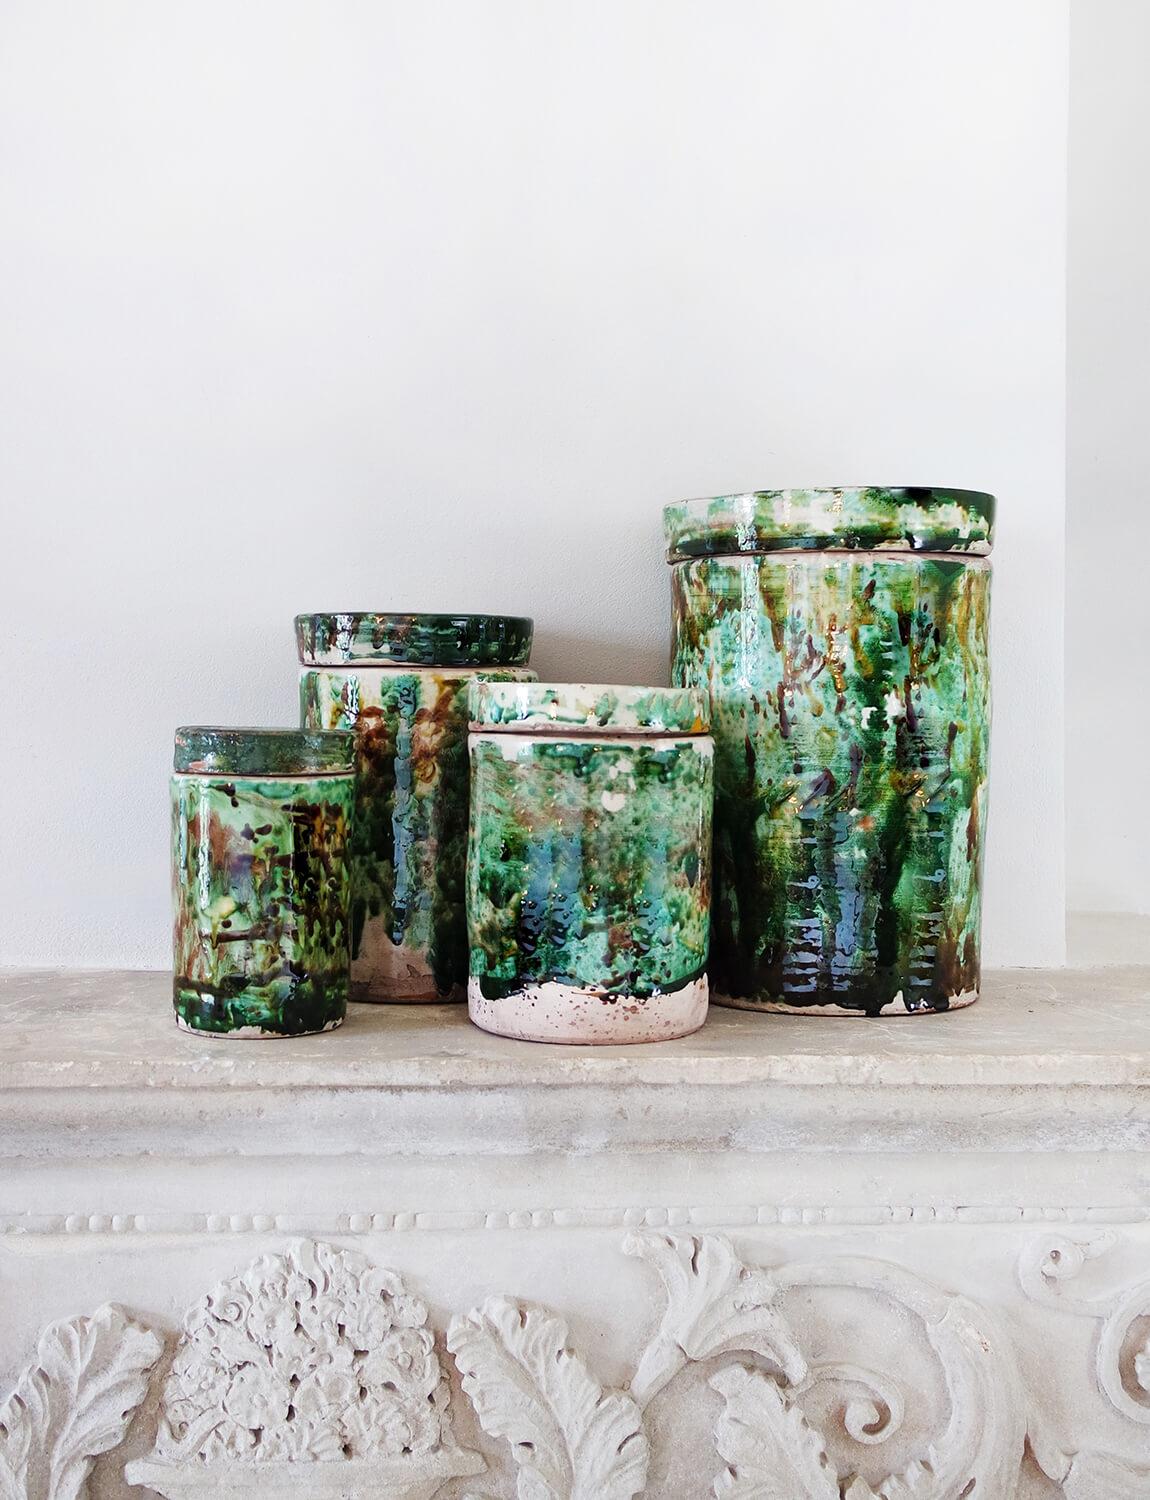 Found in Southern Italy, these exquisite and unusual green pots made in the mid 20th century were originally used to preserve dried figs. More commonly seen in a cream ceramic, these particular pieces are an extraordinary green colour due to their